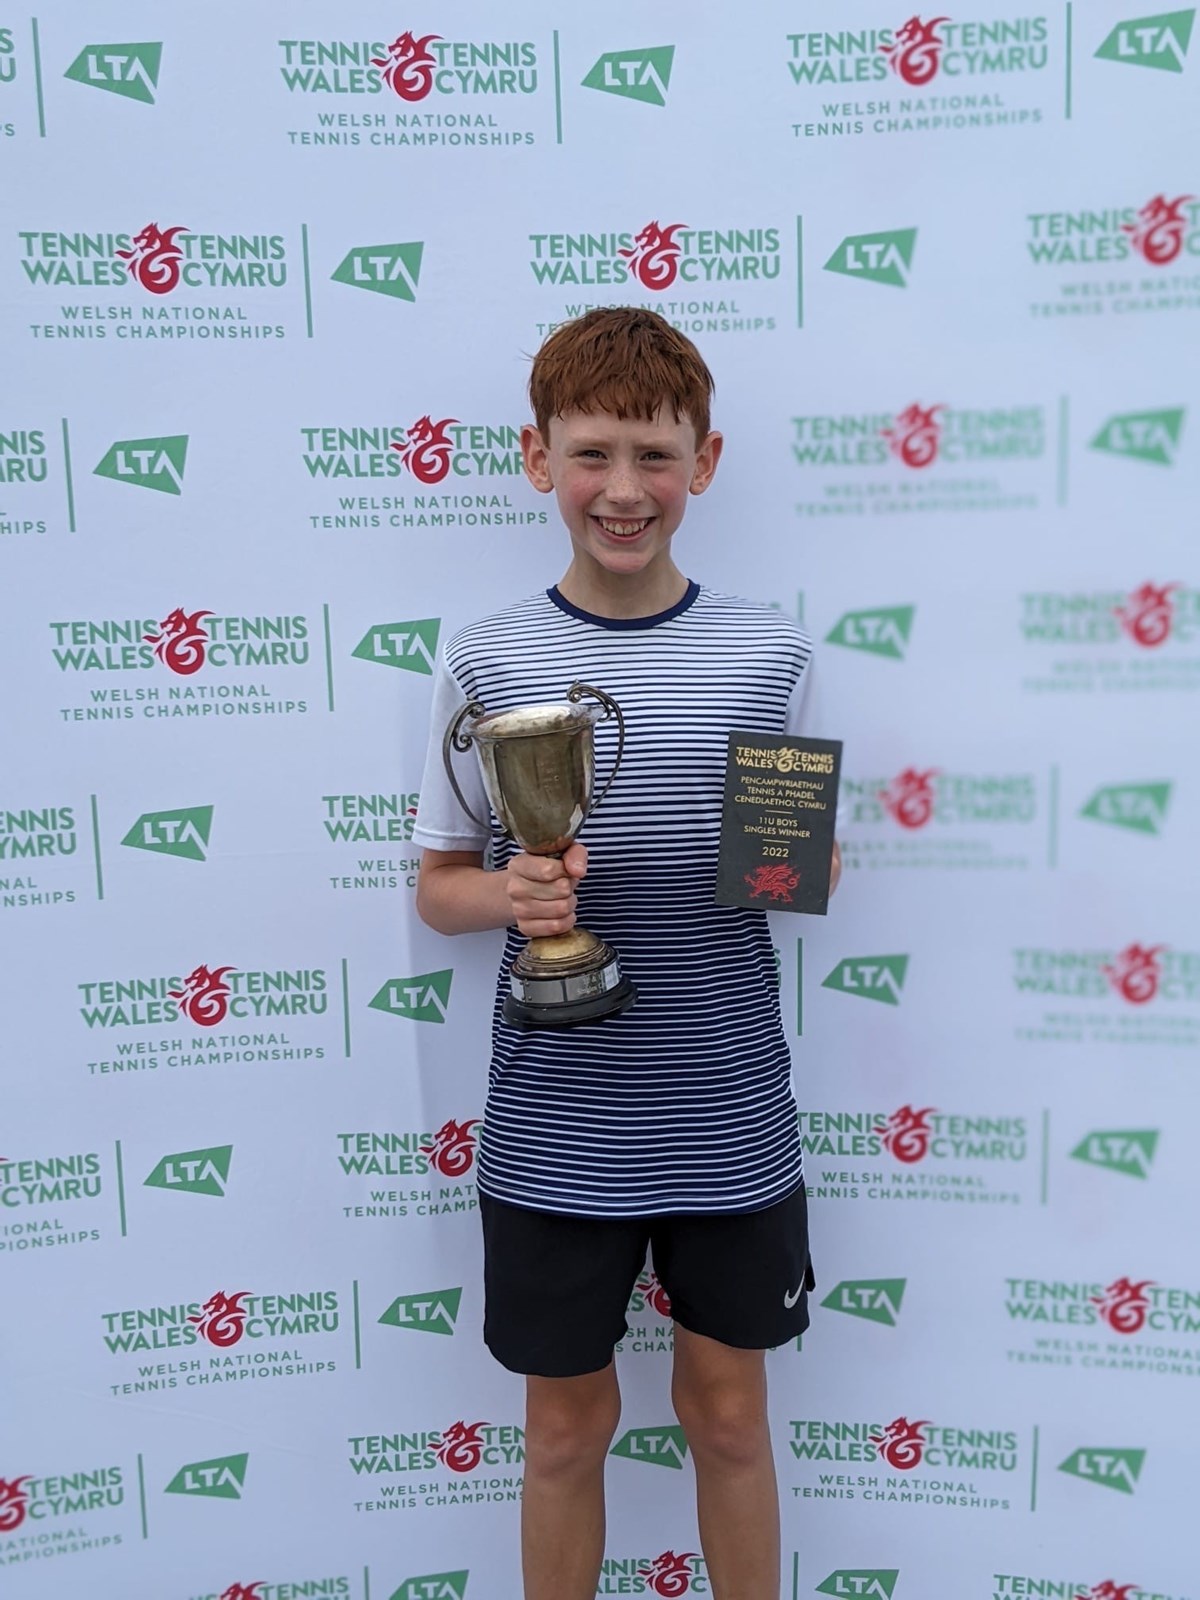 Maxle posing with his trophy infront of Tennis Wales